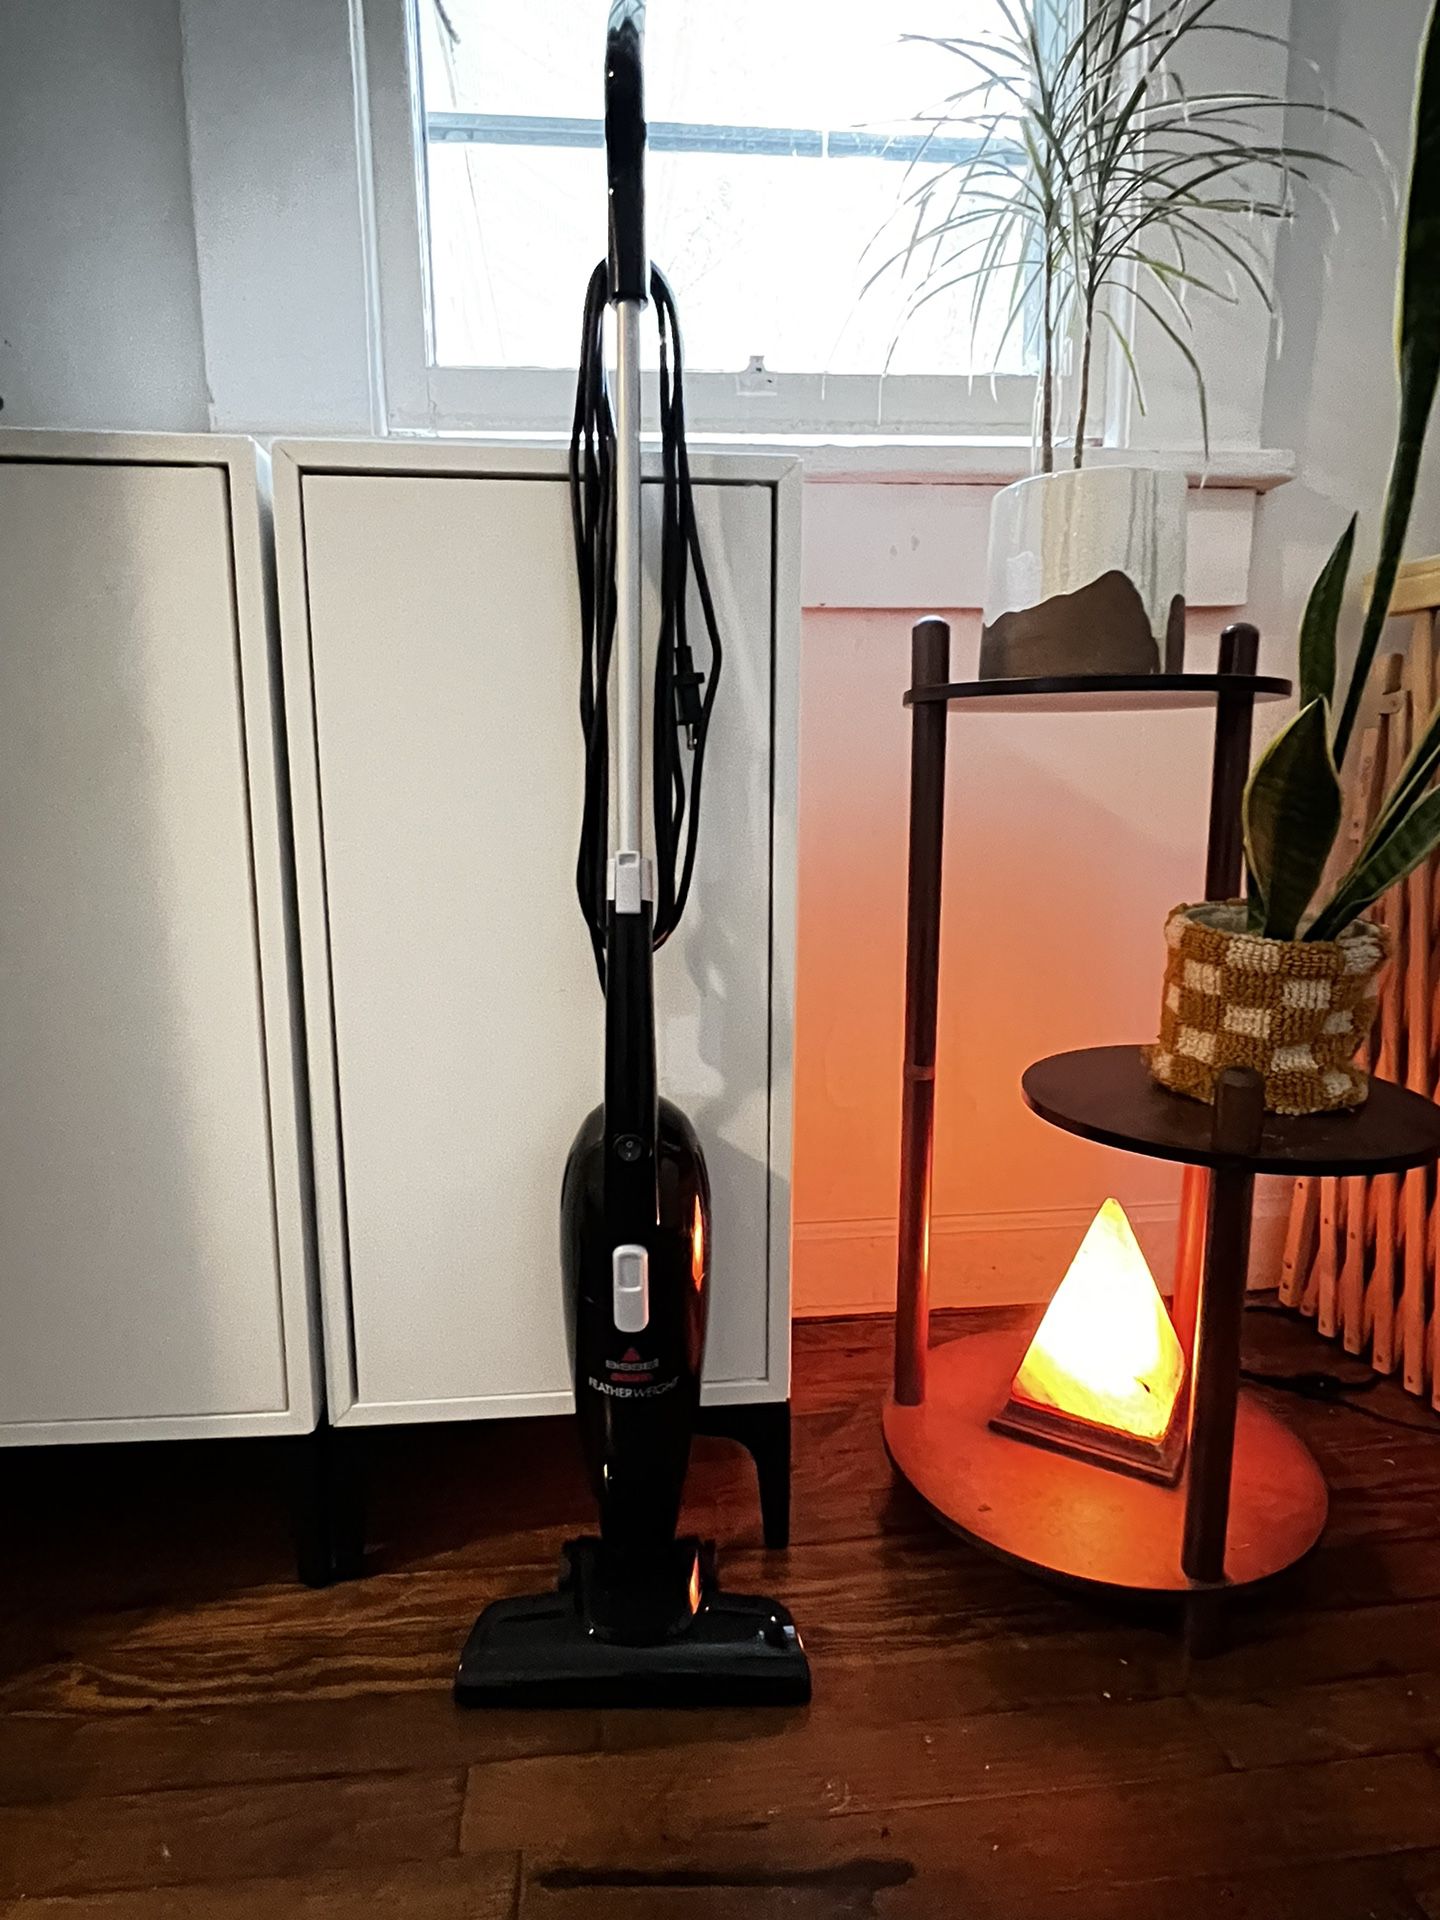 Bissell Featherweight Vacuum 